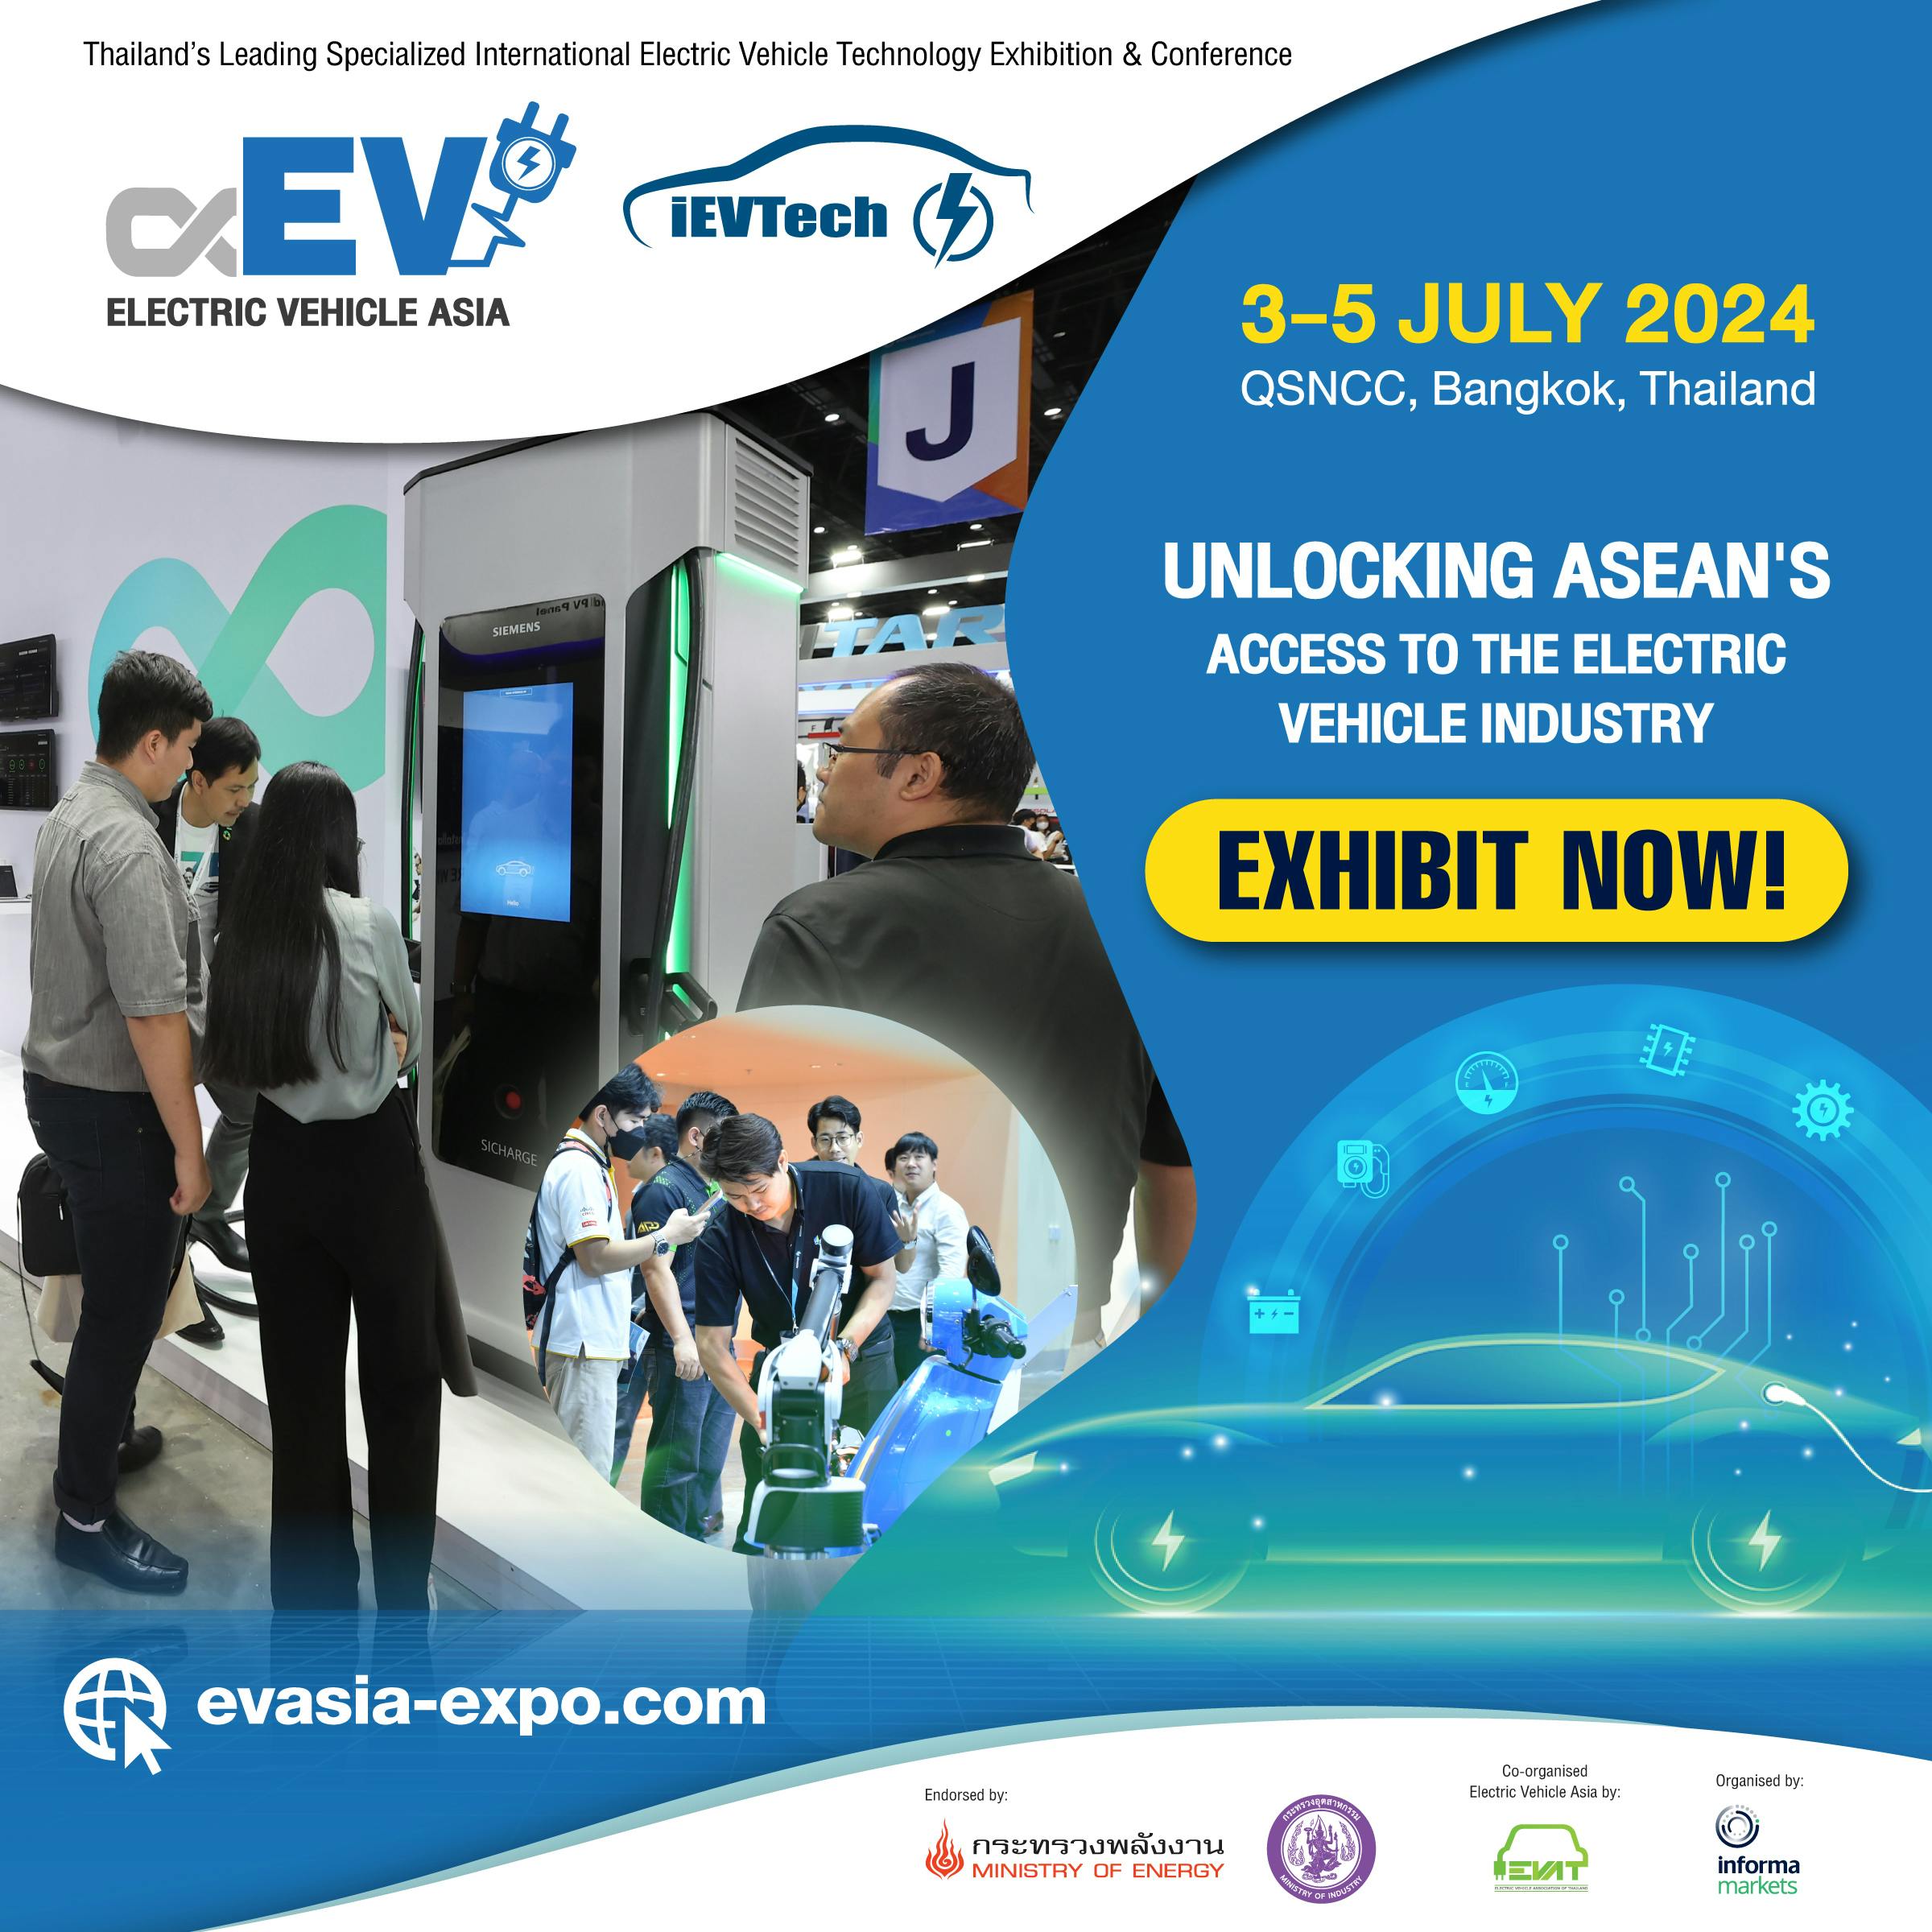 ELECTRIC VEHICLE ASIA 2024